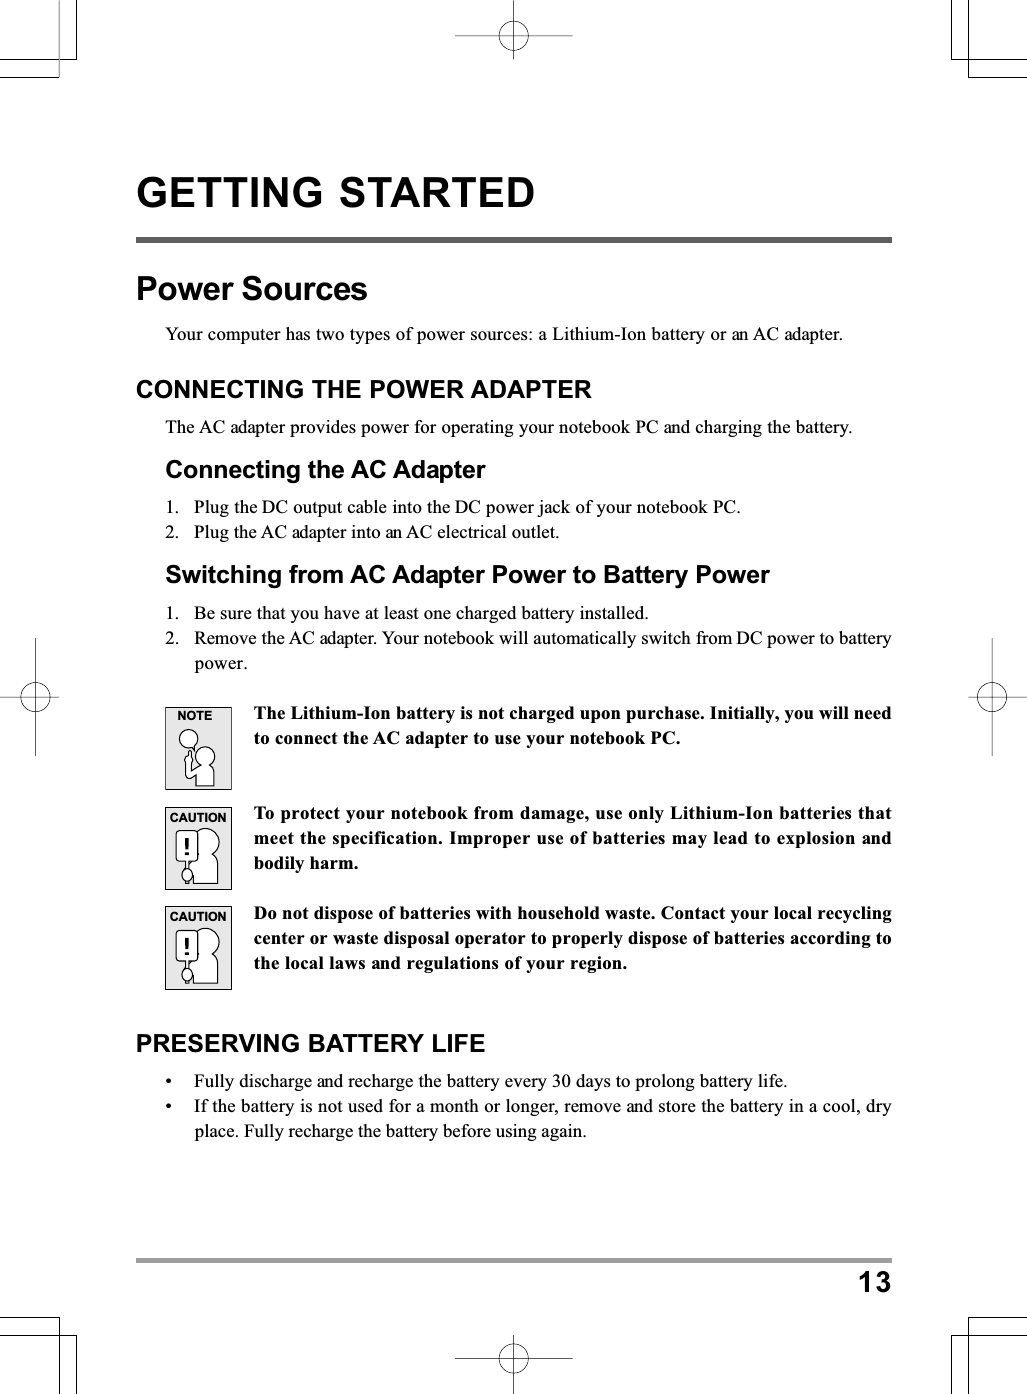 13GETTING STARTEDPower SourcesYour computer has two types of power sources: a Lithium-Ion battery or an AC adapter.CONNECTING THE POWER ADAPTERThe AC adapter provides power for operating your notebook PC and charging the battery.Connecting the AC Adapter1. Plug the DC output cable into the DC power jack of your notebook PC.2. Plug the AC adapter into an AC electrical outlet.Switching from AC Adapter Power to Battery Power1. Be sure that you have at least one charged battery installed.2. Remove the AC adapter. Your notebook will automatically switch from DC power to batterypower.The Lithium-Ion battery is not charged upon purchase. Initially, you will needto connect the AC adapter to use your notebook PC.To protect your notebook from damage, use only Lithium-Ion batteries thatmeet the specification. Improper use of batteries may lead to explosion andbodily harm.Do not dispose of batteries with household waste. Contact your local recyclingcenter or waste disposal operator to properly dispose of batteries according tothe local laws and regulations of your region.PRESERVING BATTERY LIFE• Fully discharge and recharge the battery every 30 days to prolong battery life.• If the battery is not used for a month or longer, remove and store the battery in a cool, dryplace. Fully recharge the battery before using again.NOTECAUTIONCAUTION